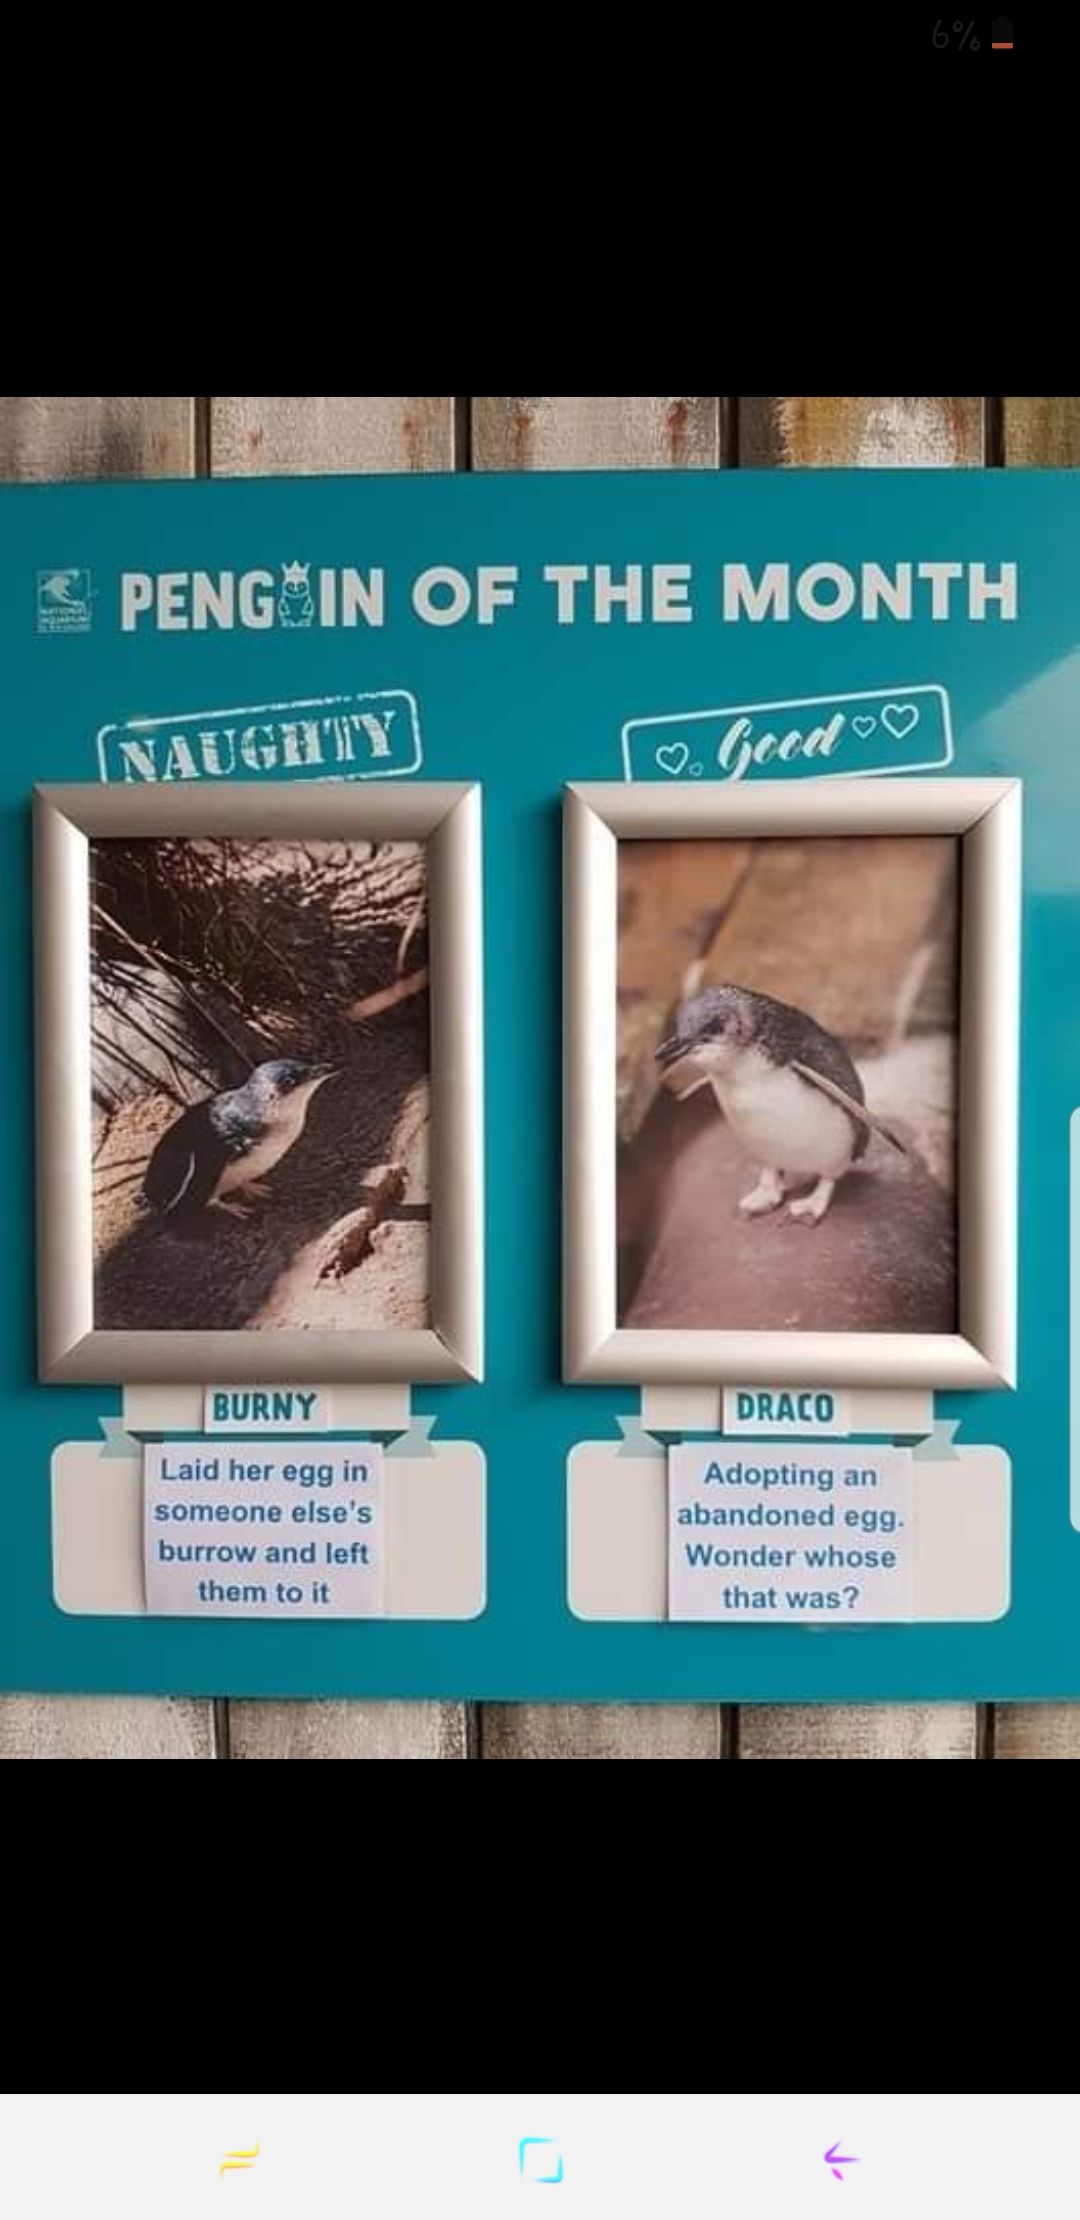 I look forward to the National Aquarium of New Zealand's naughty/good penguins every month!